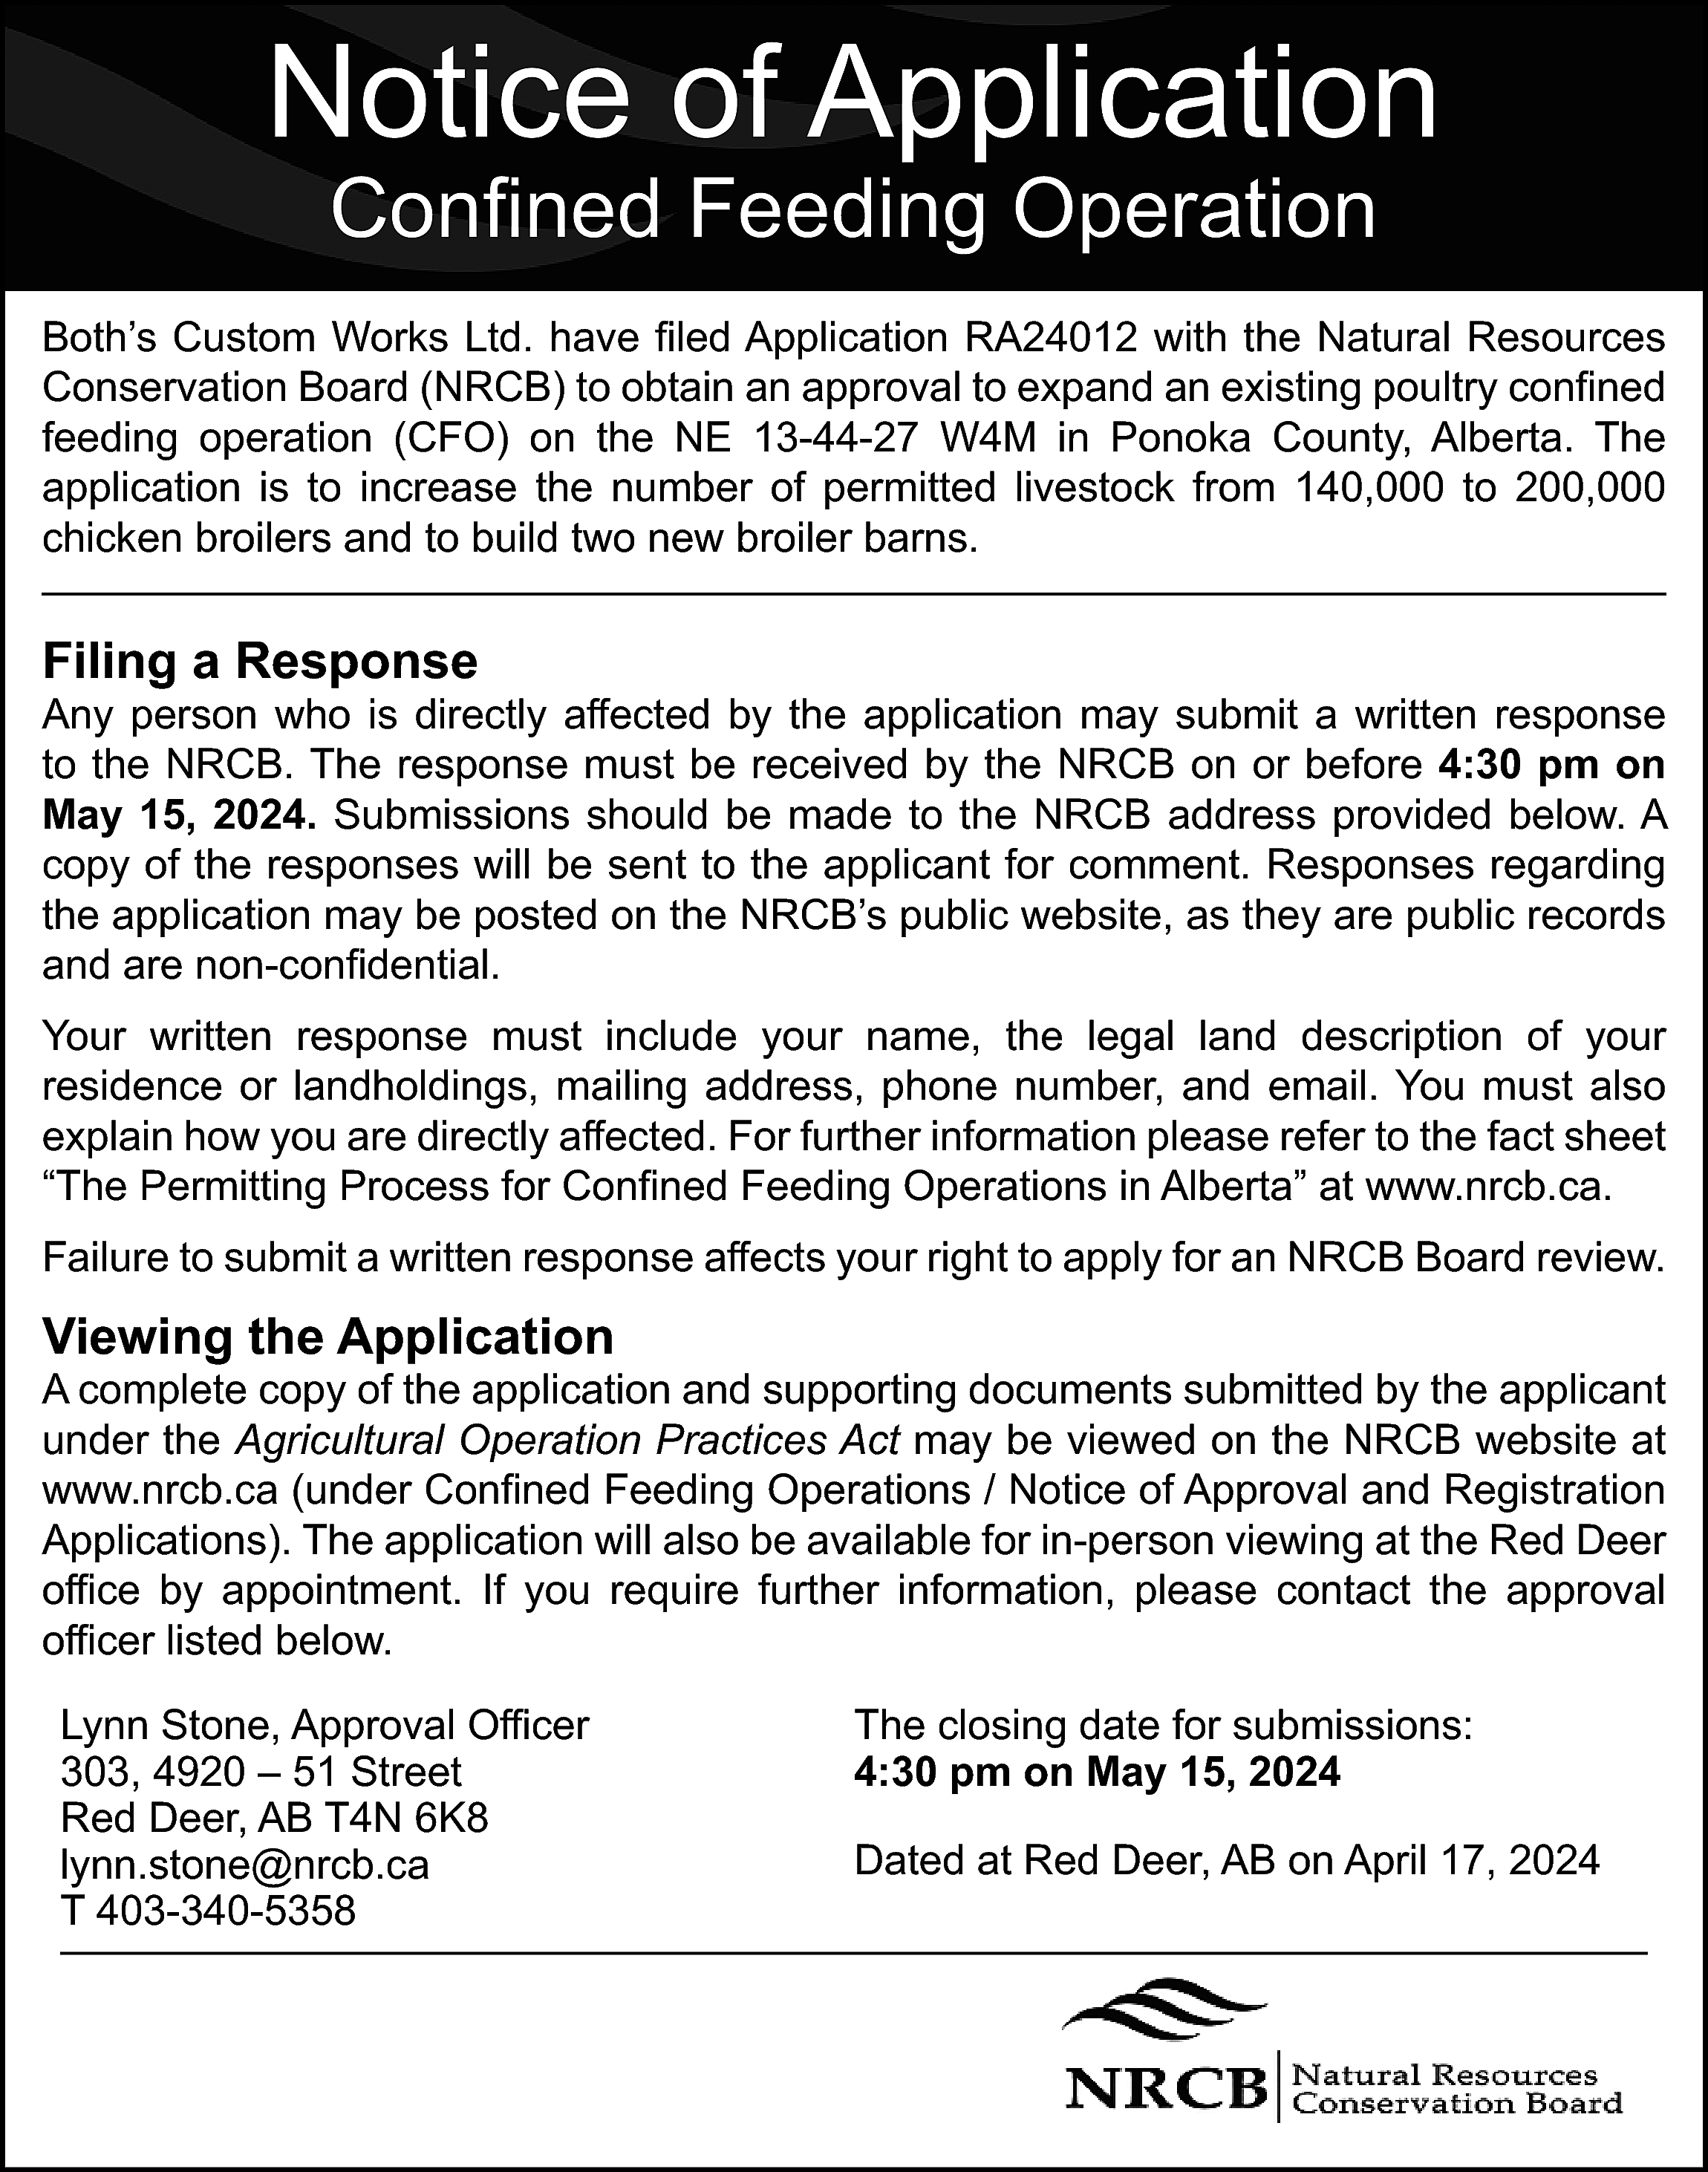 Notice of Application <br>Confined Feeding  Notice of Application  Confined Feeding Operation    Both’s Custom Works Ltd. have filed Application RA24012 with the Natural Resources  Conservation Board (NRCB) to obtain an approval to expand an existing poultry confined  feeding operation (CFO) on the NE 13-44-27 W4M in Ponoka County, Alberta. The  application is to increase the number of permitted livestock from 140,000 to 200,000  chicken broilers and to build two new broiler barns.    Filing a Response    Any person who is directly affected by the application may submit a written response  to the NRCB. The response must be received by the NRCB on or before 4:30 pm on  May 15, 2024. Submissions should be made to the NRCB address provided below. A  copy of the responses will be sent to the applicant for comment. Responses regarding  the application may be posted on the NRCB’s public website, as they are public records  and are non-confidential.  Your written response must include your name, the legal land description of your  residence or landholdings, mailing address, phone number, and email. You must also  explain how you are directly affected. For further information please refer to the fact sheet  “The Permitting Process for Confined Feeding Operations in Alberta” at www.nrcb.ca.  Failure to submit a written response affects your right to apply for an NRCB Board review.    Viewing the Application    A complete copy of the application and supporting documents submitted by the applicant  under the Agricultural Operation Practices Act may be viewed on the NRCB website at  www.nrcb.ca (under Confined Feeding Operations / Notice of Approval and Registration  Applications). The application will also be available for in-person viewing at the Red Deer  office by appointment. If you require further information, please contact the approval  officer listed below.  Lynn Stone, Approval Officer  303, 4920 – 51 Street  Red Deer, AB T4N 6K8  lynn.stone@nrcb.ca  T 403-340-5358    The closing date for submissions:  4:30 pm on May 15, 2024  Dated at Red Deer, AB on April 17, 2024    